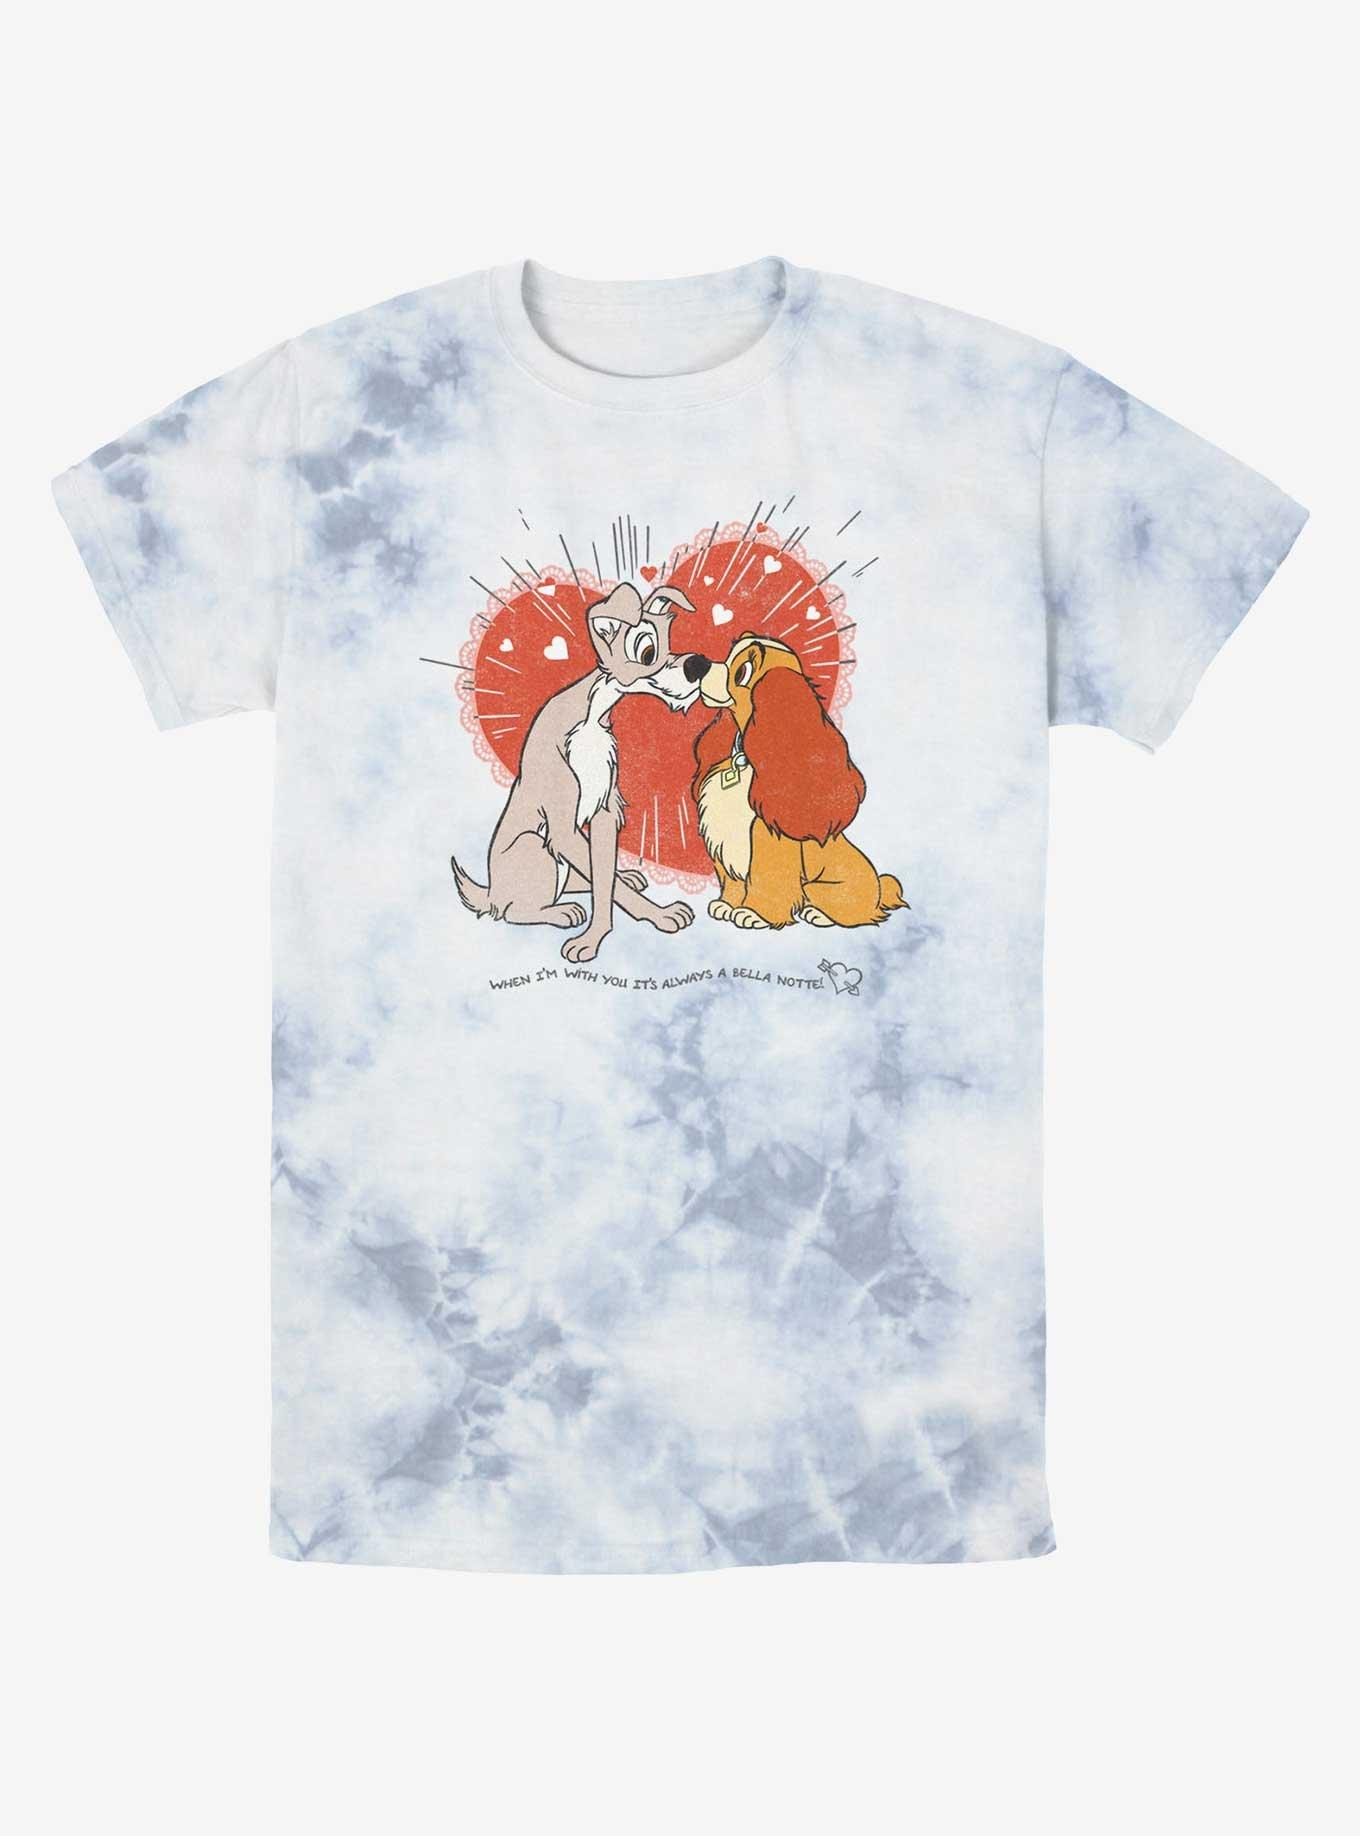 Disney Lady and the Tramp Bella Notte Lovers Tie-Dye T-Shirt, WHITEBLUE, hi-res